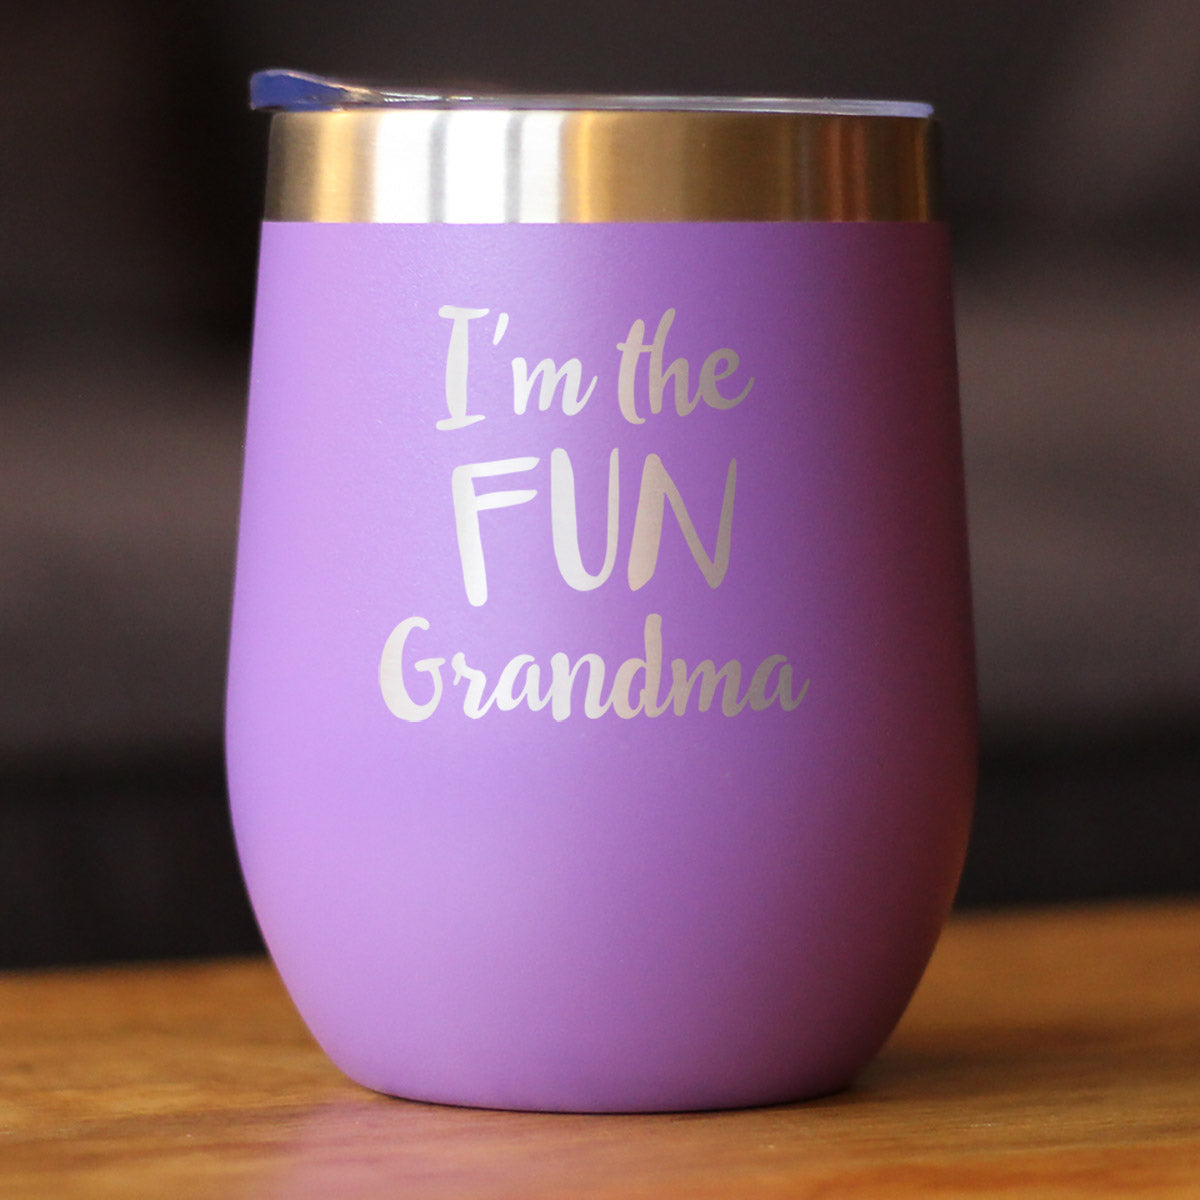 Fun Grandma - Wine Tumbler with Sliding Lid - Stemless Stainless Steel Insulated Cup - Funny Outdoor Camping Gifts